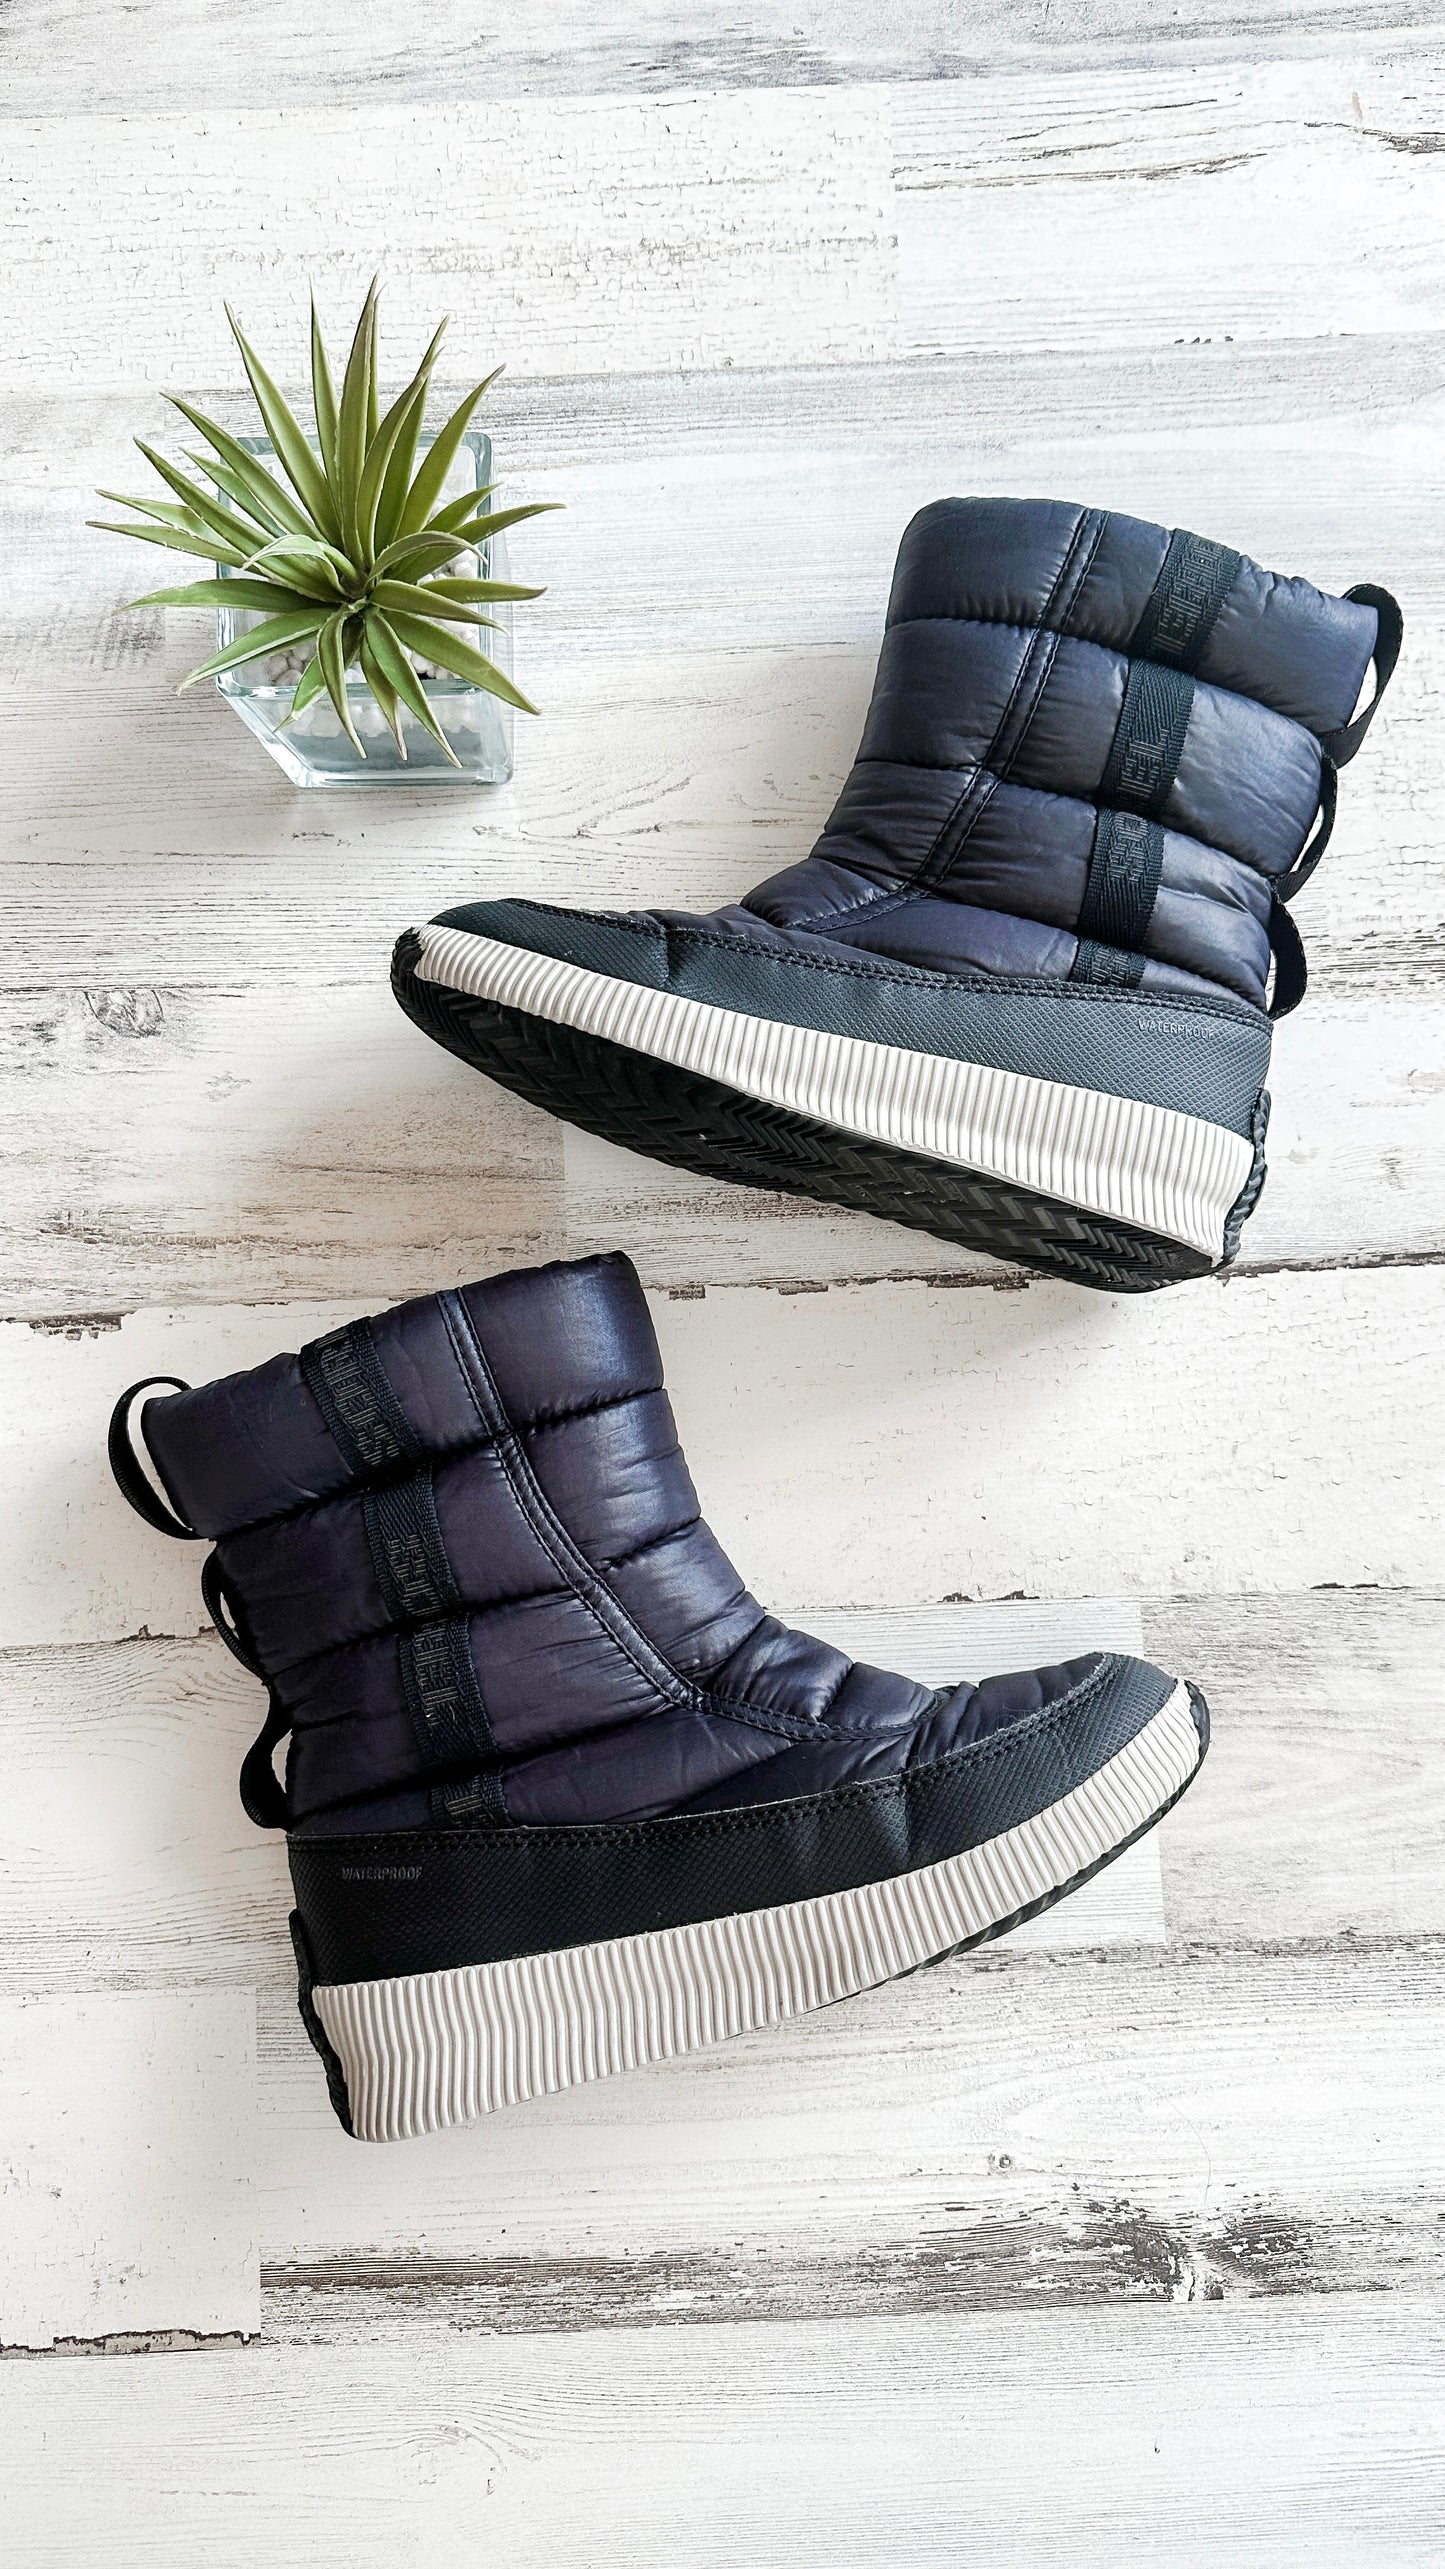 Sorel Out and About Puffy Boots in Navy (8)